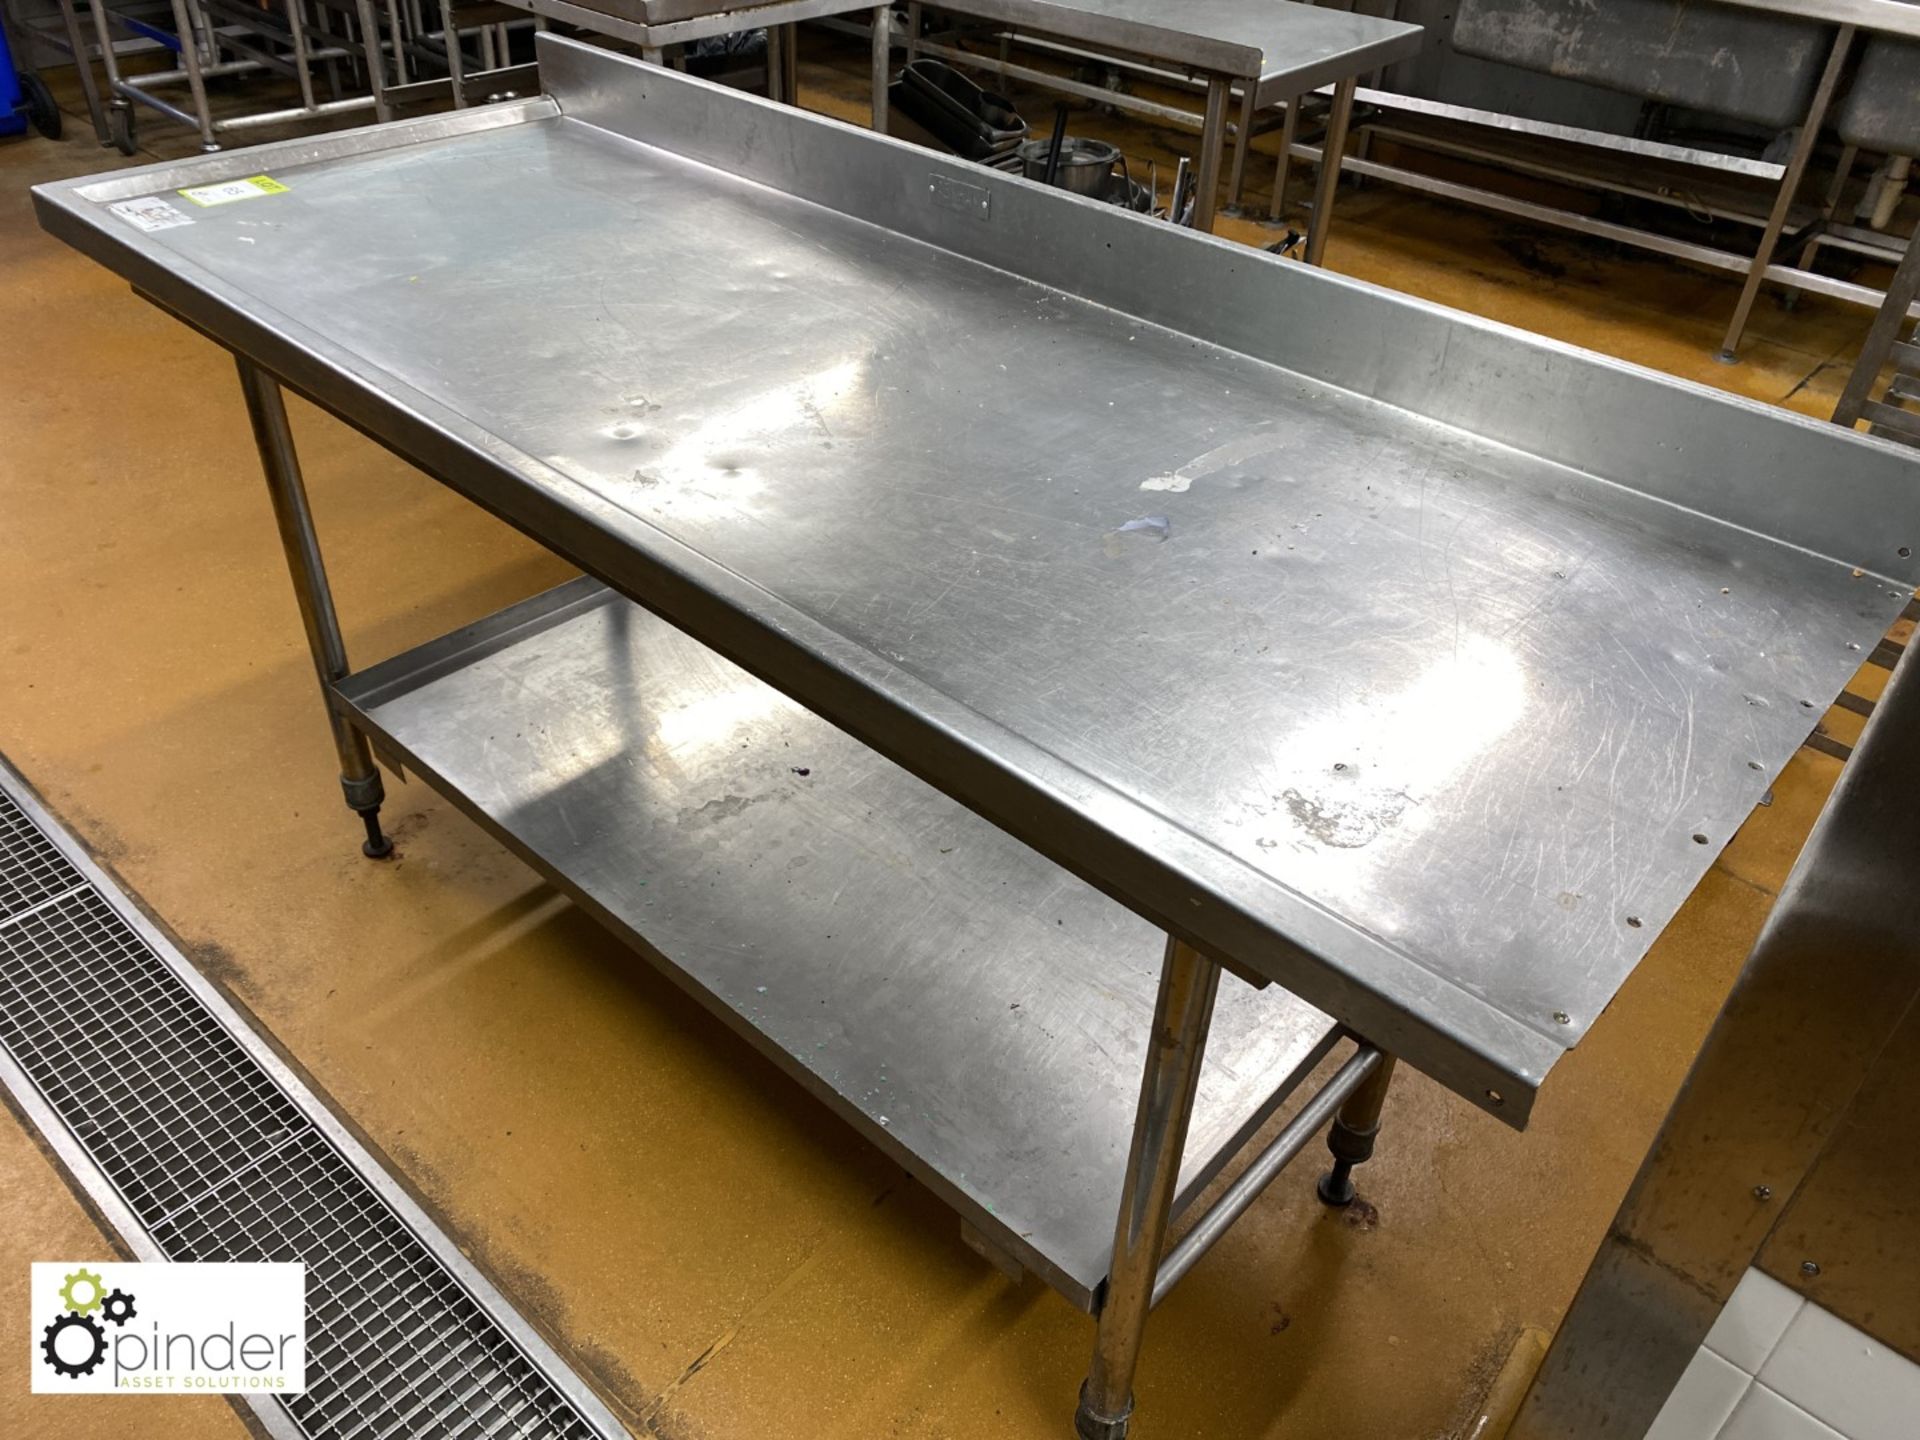 Benham stainless steel Table, 1840mm x 700mm, with shelf under (located in Pot Wash Room) - Image 2 of 2